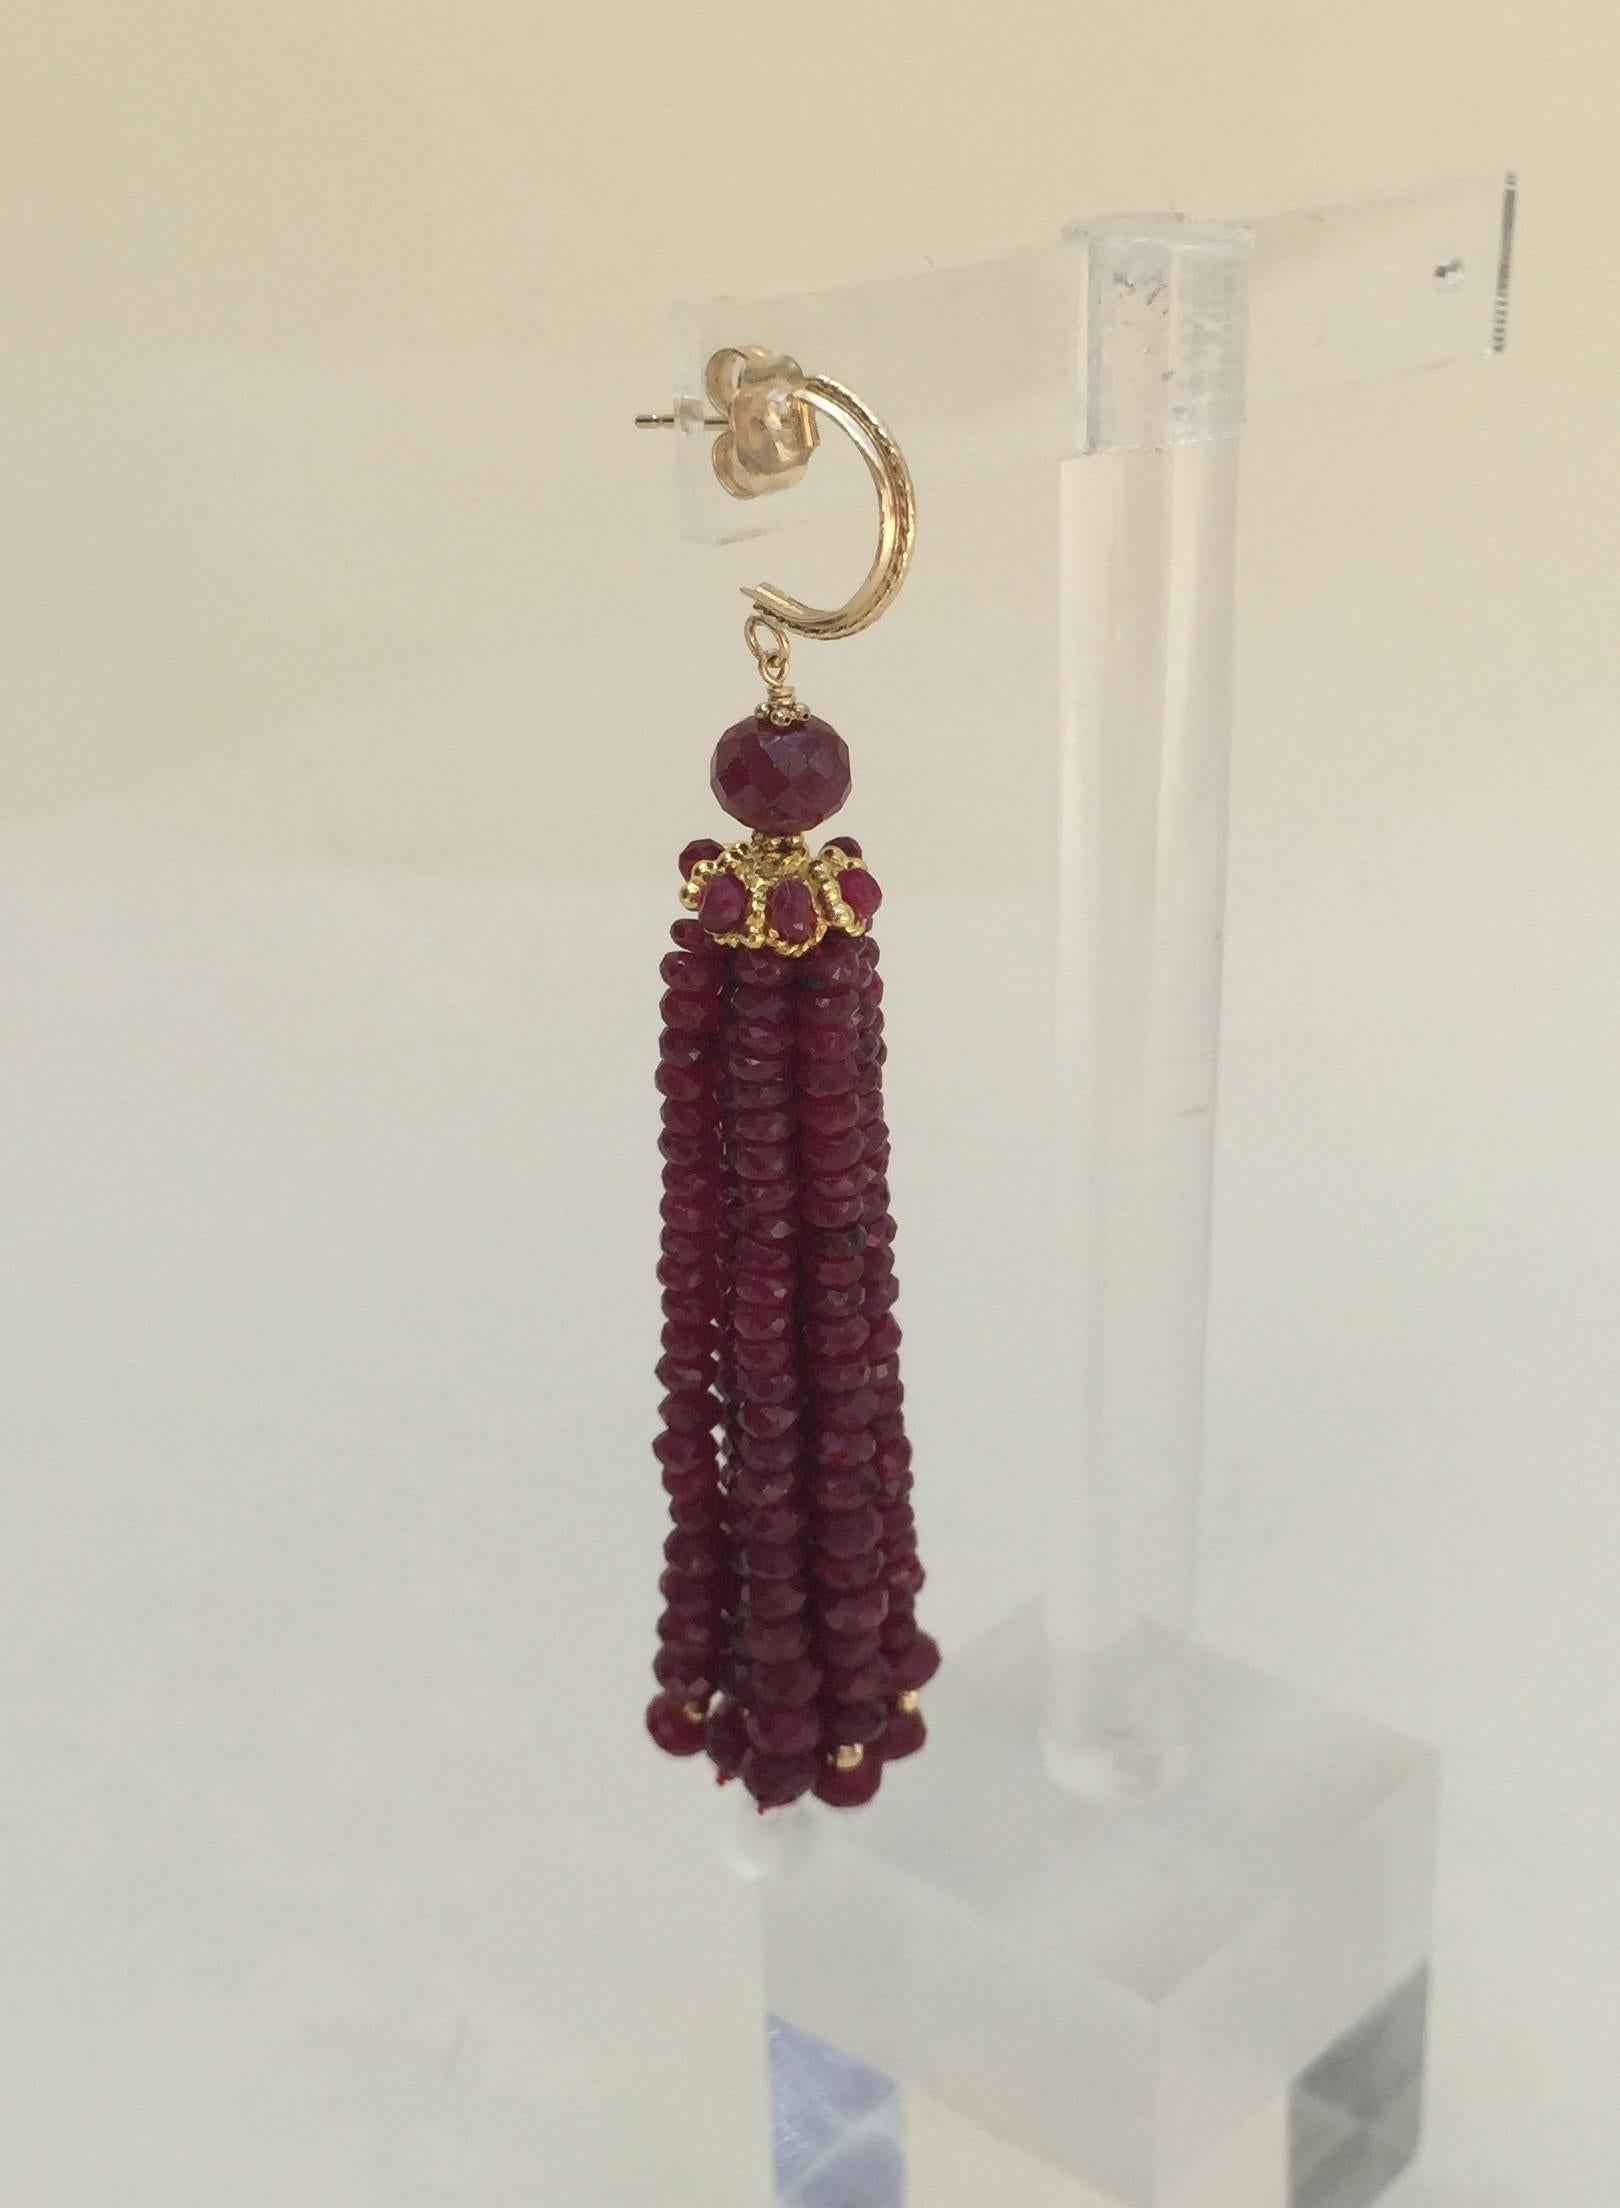 Brilliant Cut Marina J. Elegant Tassel Earrings with Sparkling Ruby Beads and 14k Yellow Gold 